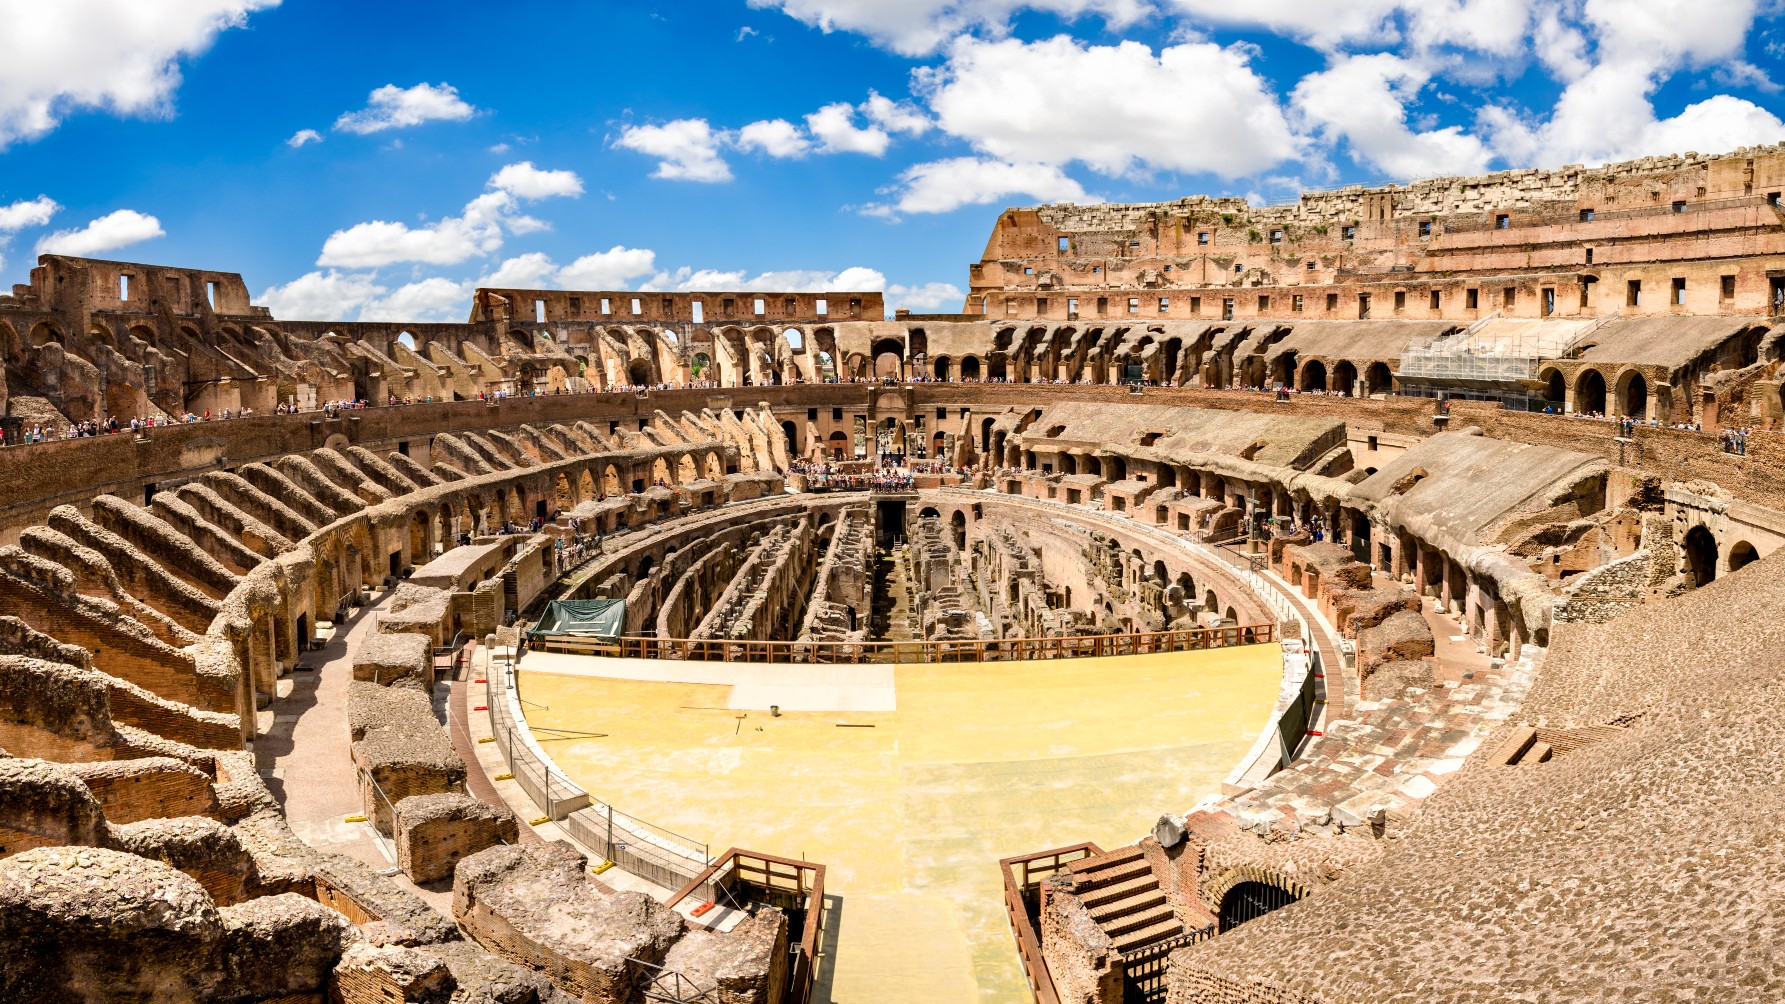 A panorama photograph of the interior of the Colosseum